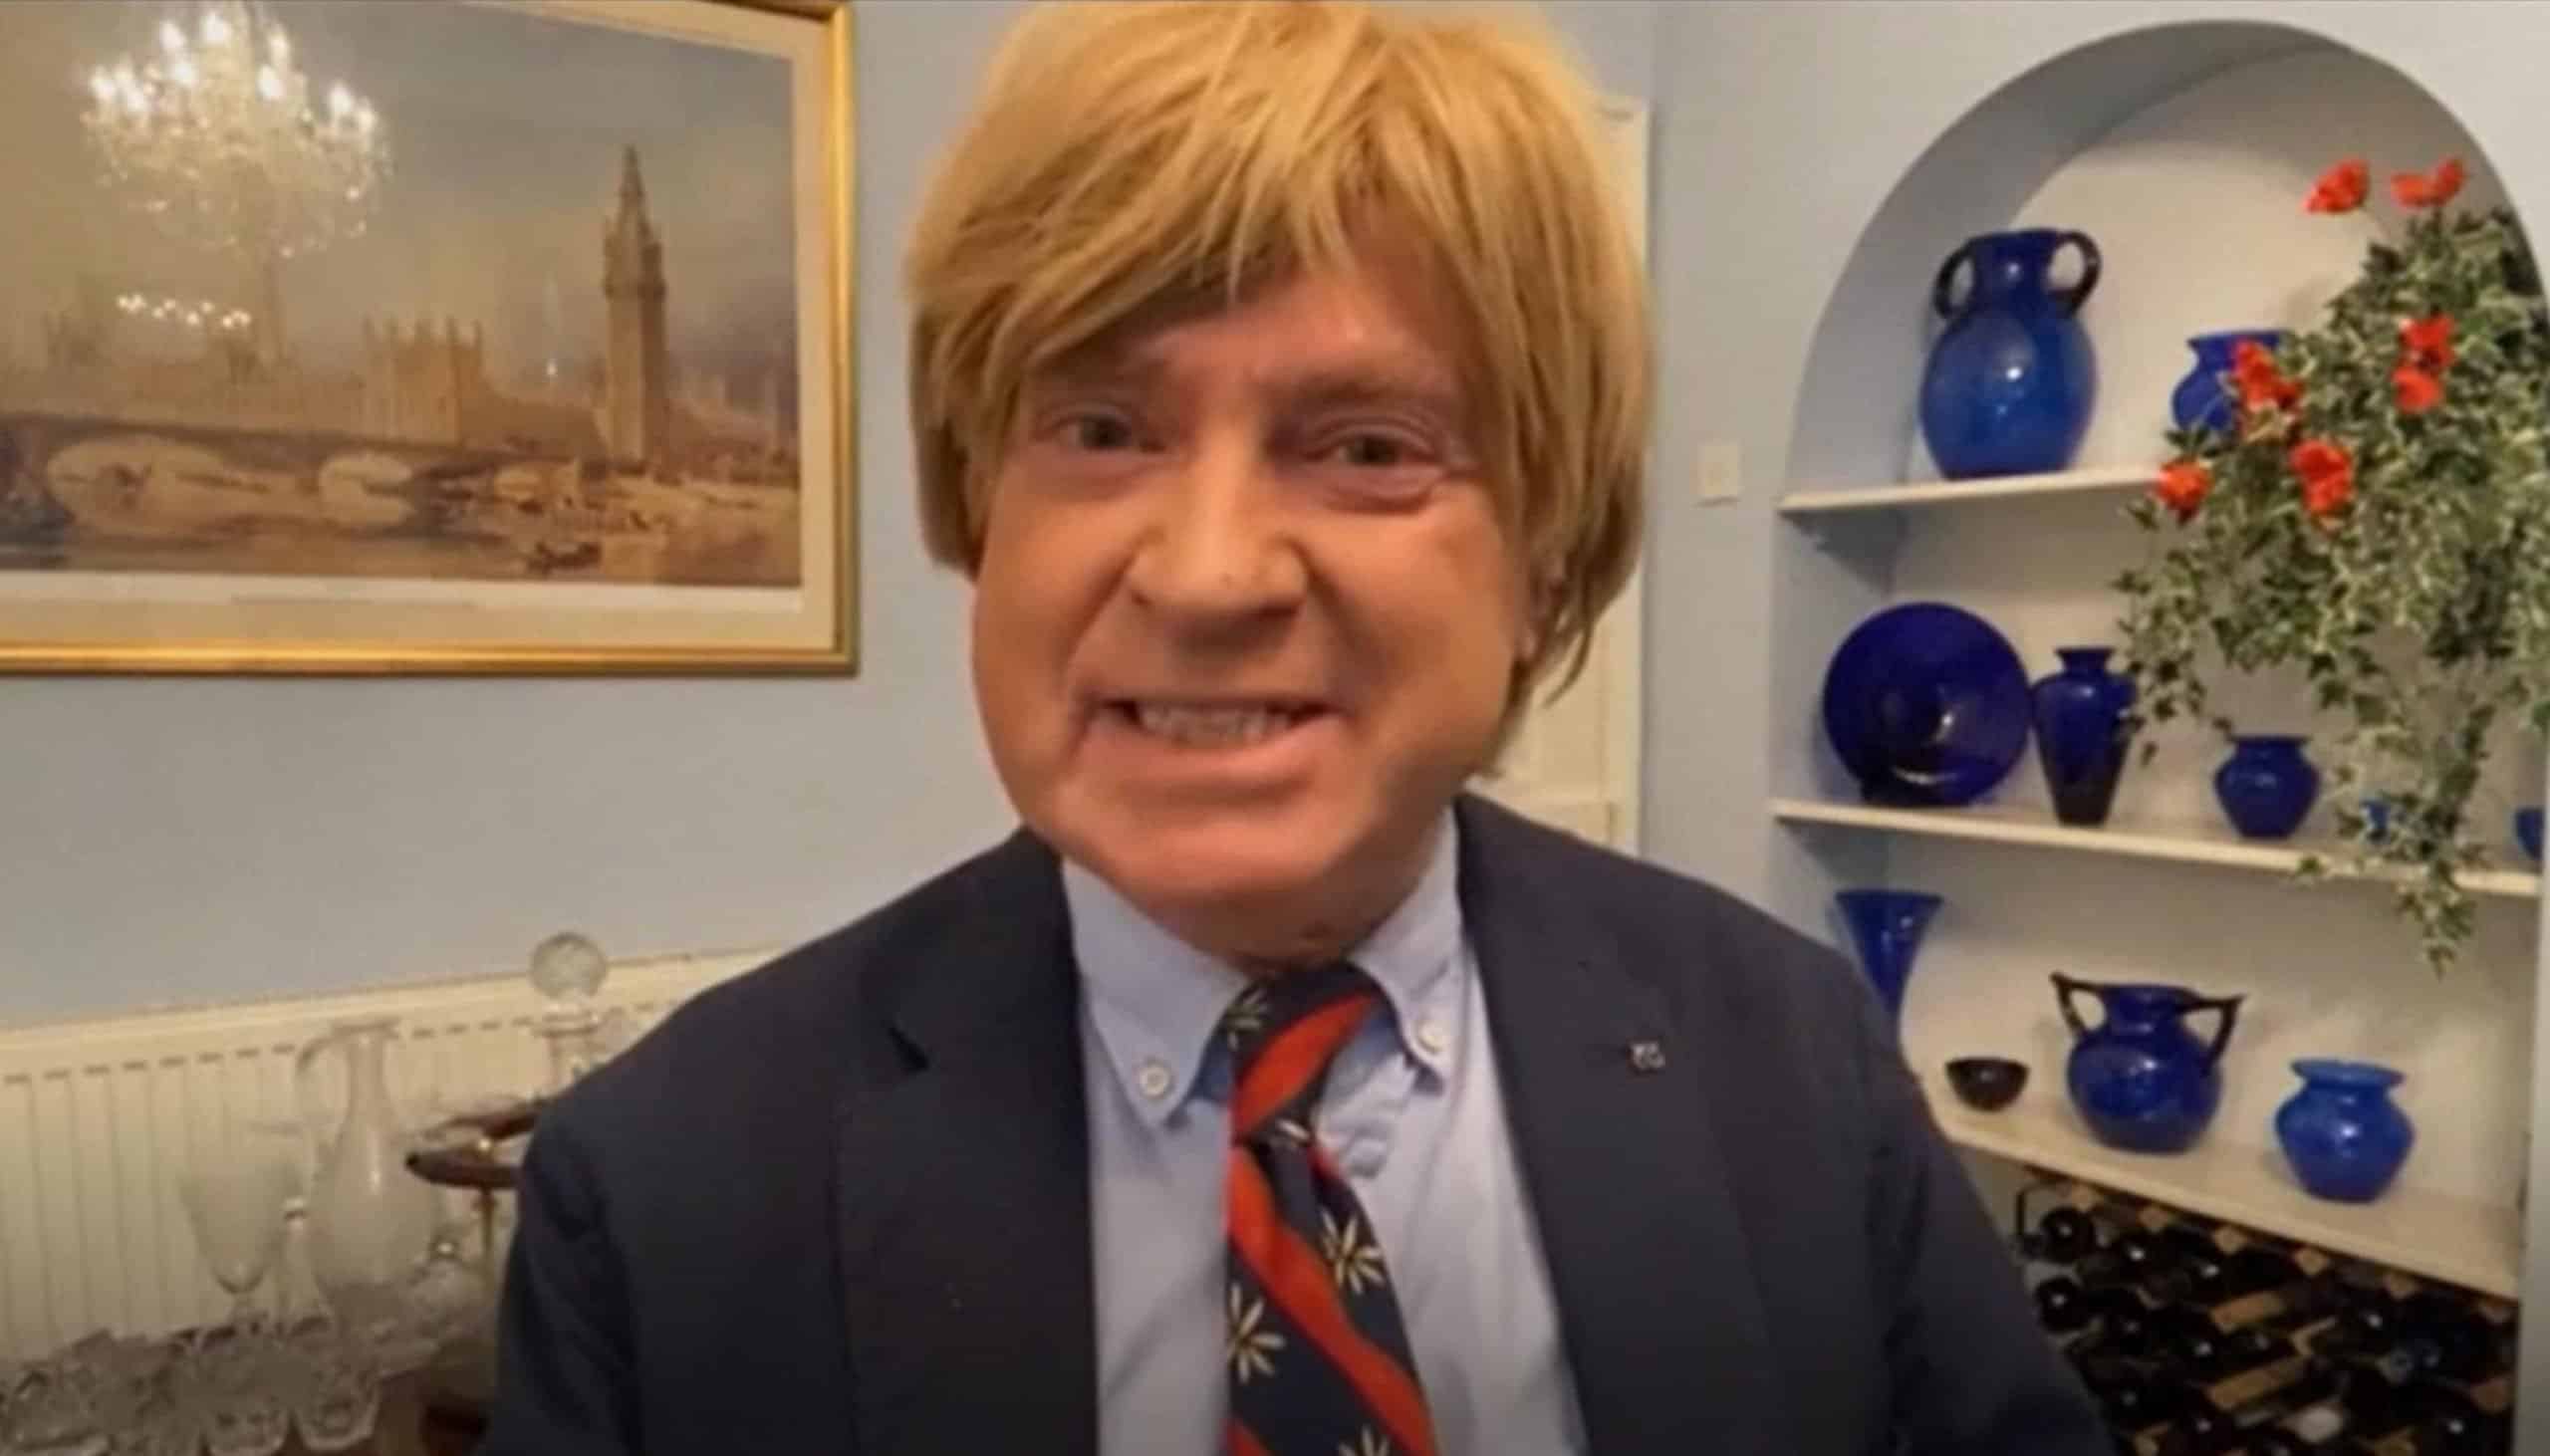 Michael Fabricant claims partygate is all ok because of something his French friends told him